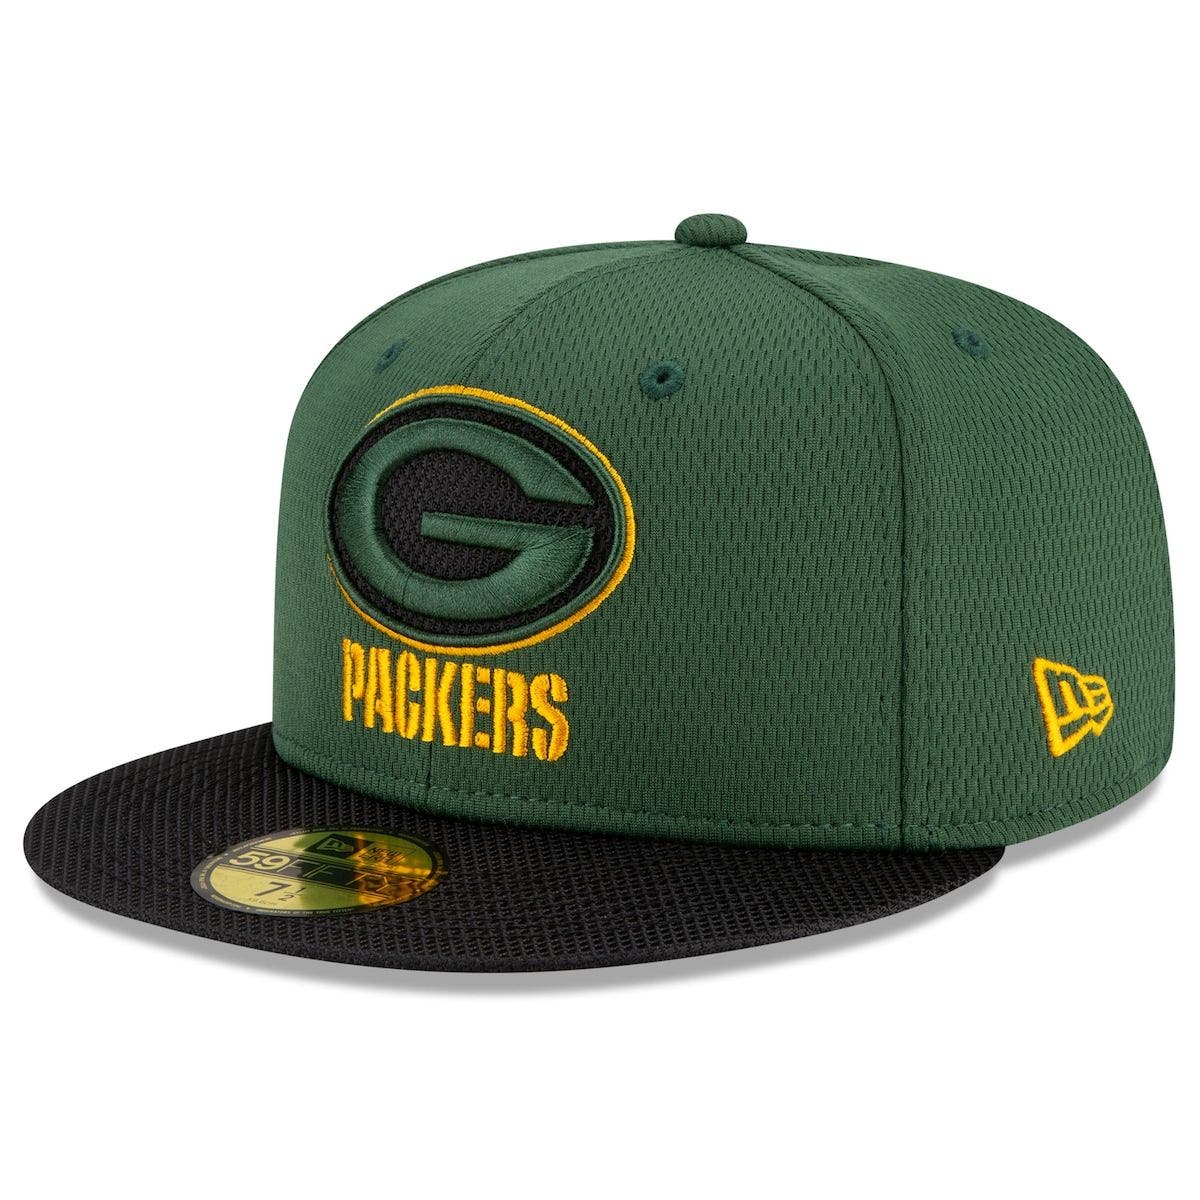 New Era 59Fifty Cap Sideline Away Green Bay Packers 